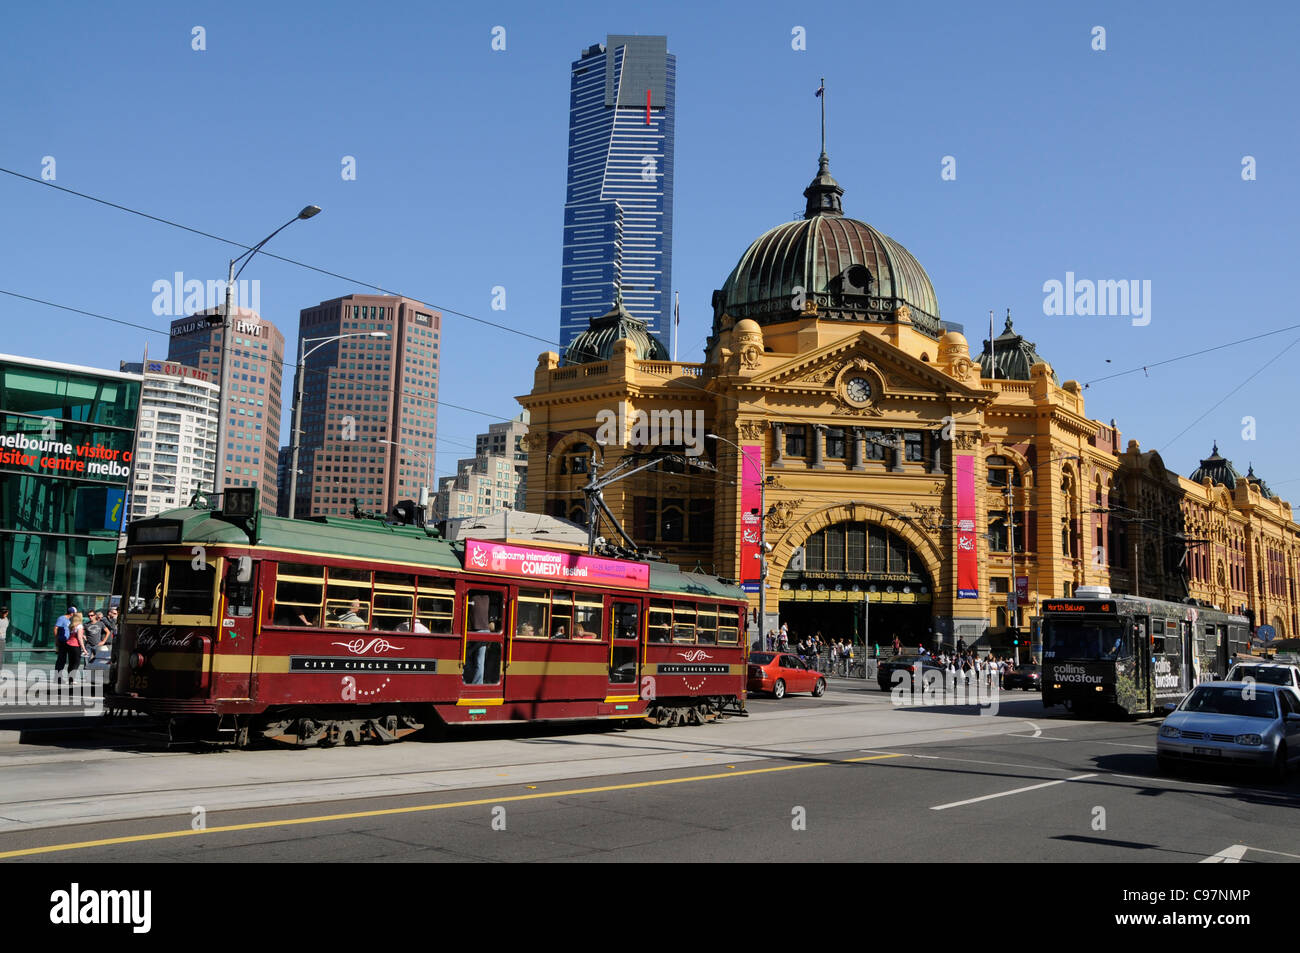 One of the eight refurbished W-Class trams (1936 to 1956) operating close to Flinders Rail station in Melbourne in Victoria state, Australia Flinders Stock Photo